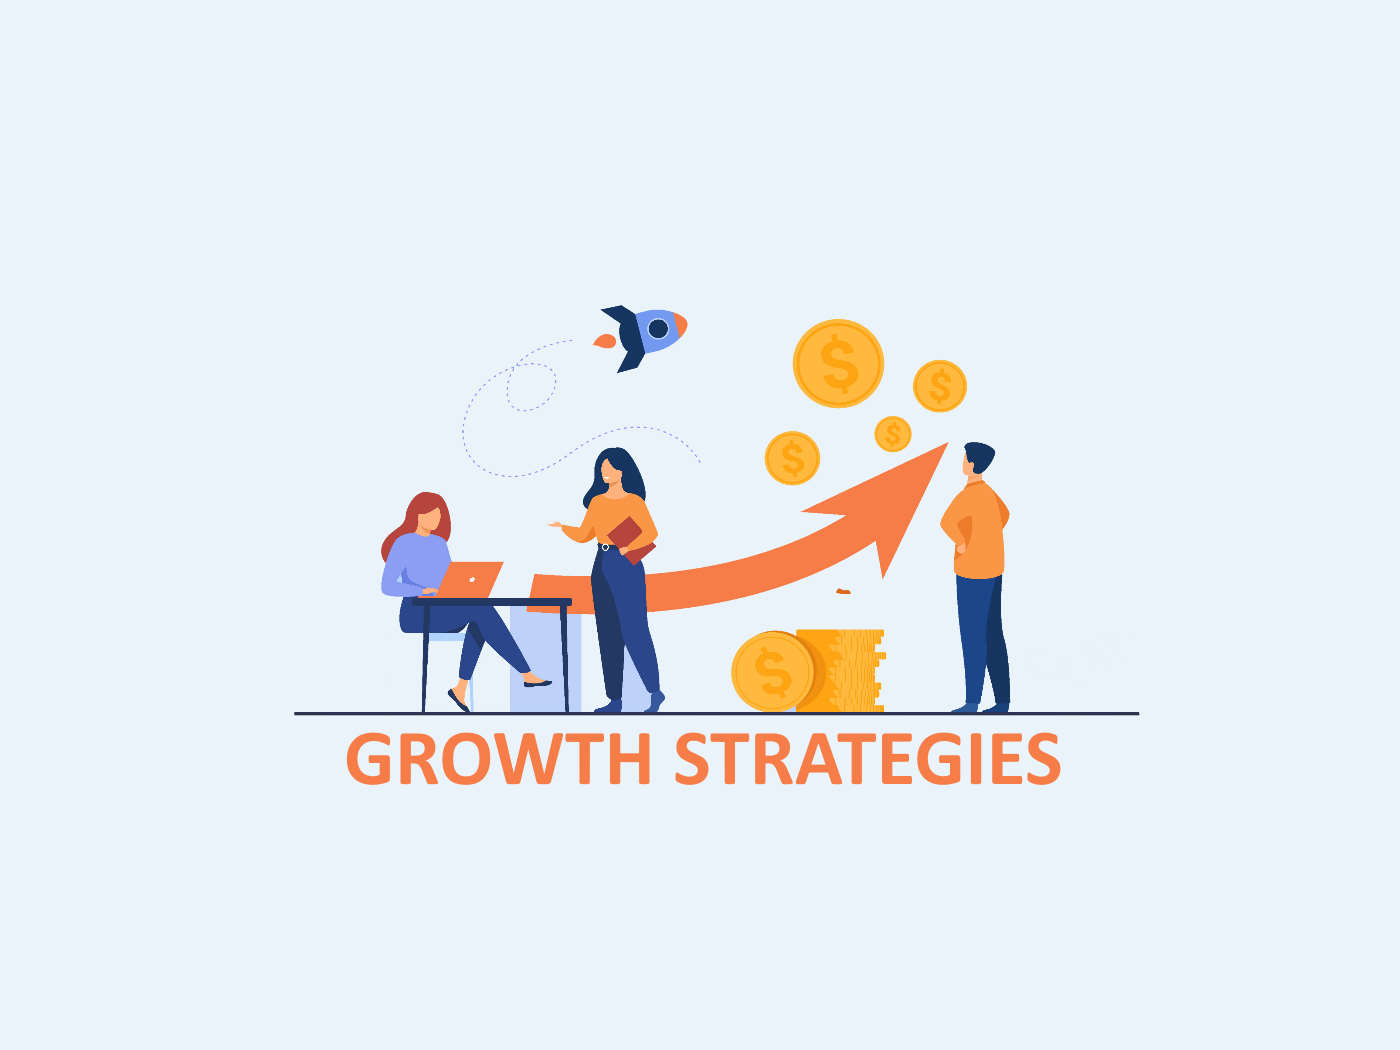 Growth Strategies: Components of a Successful Business.